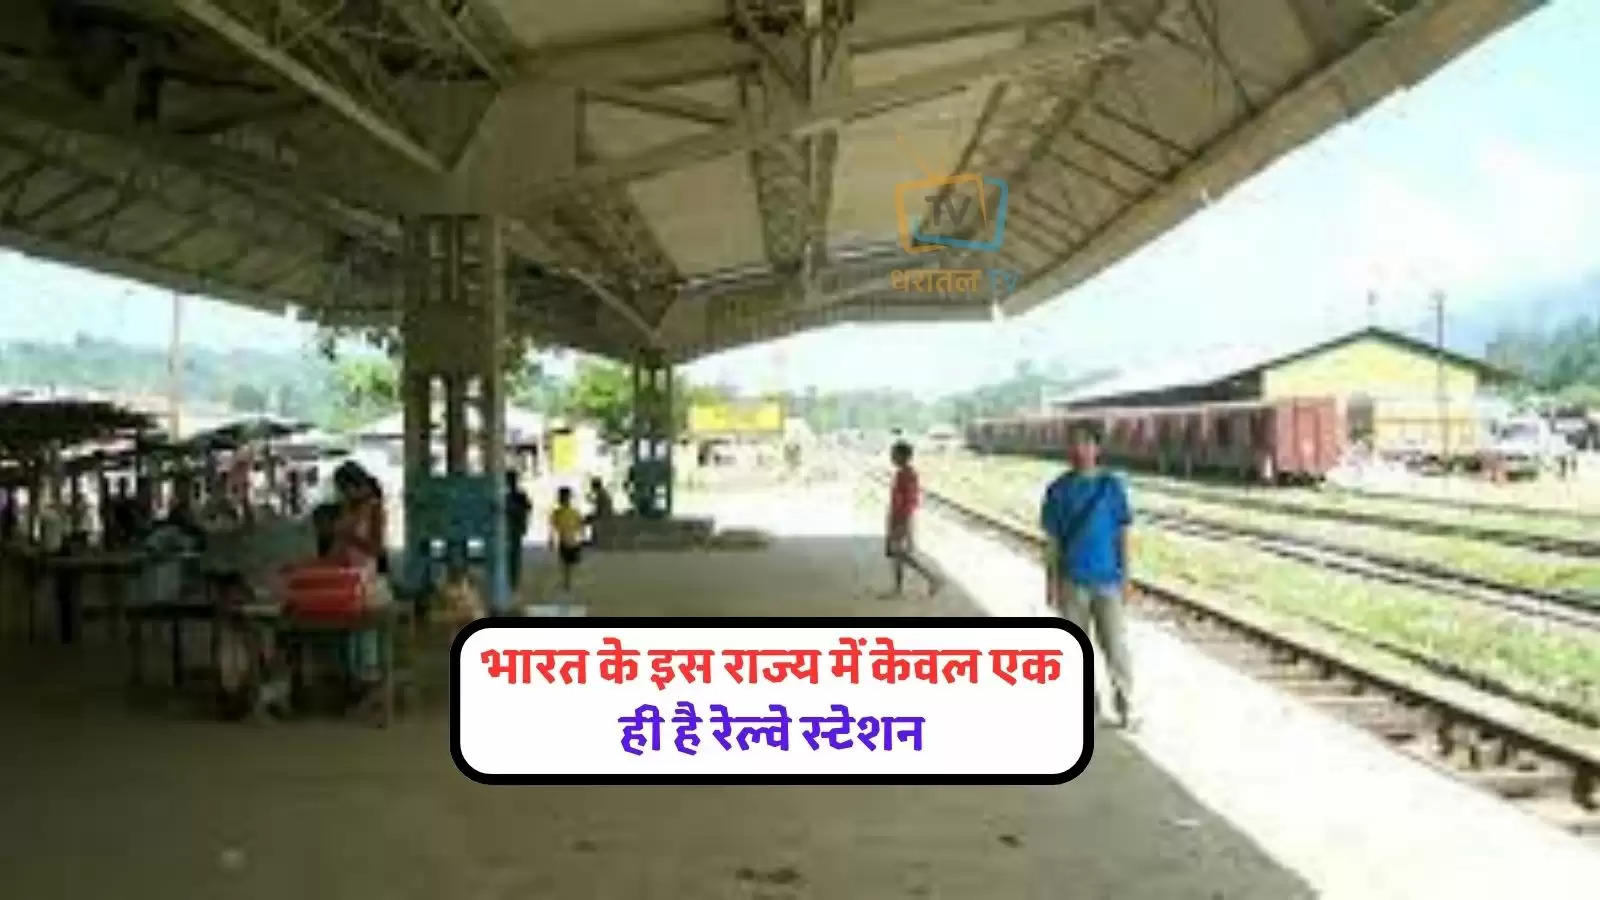 indian-railways-a-state-of-india-where-there-is-only-one-railway-station-after-that-the-railway-line-ends